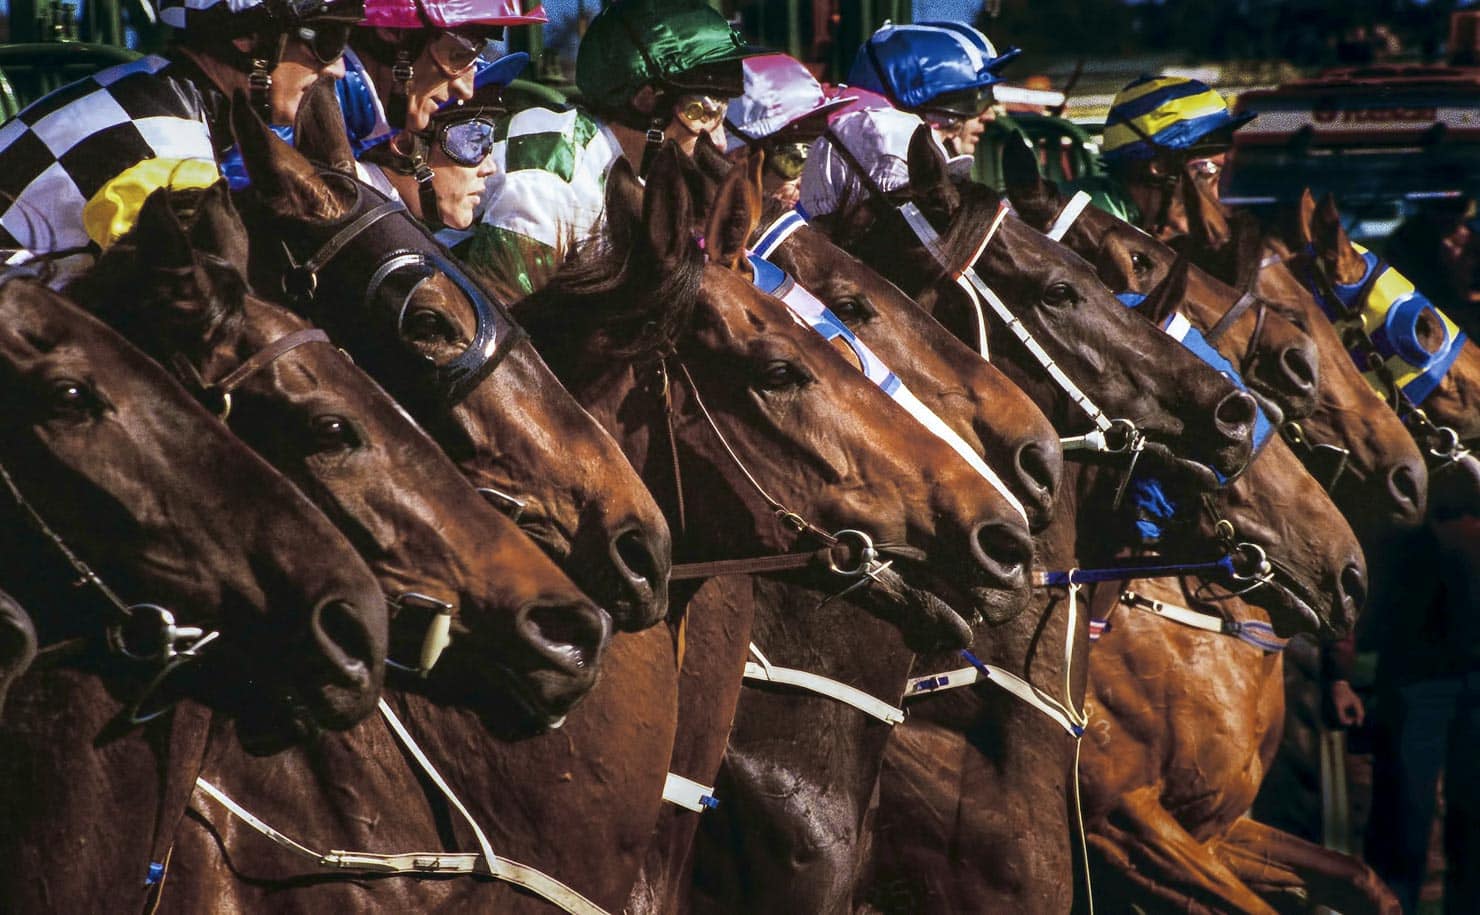 Horse Racing event photography